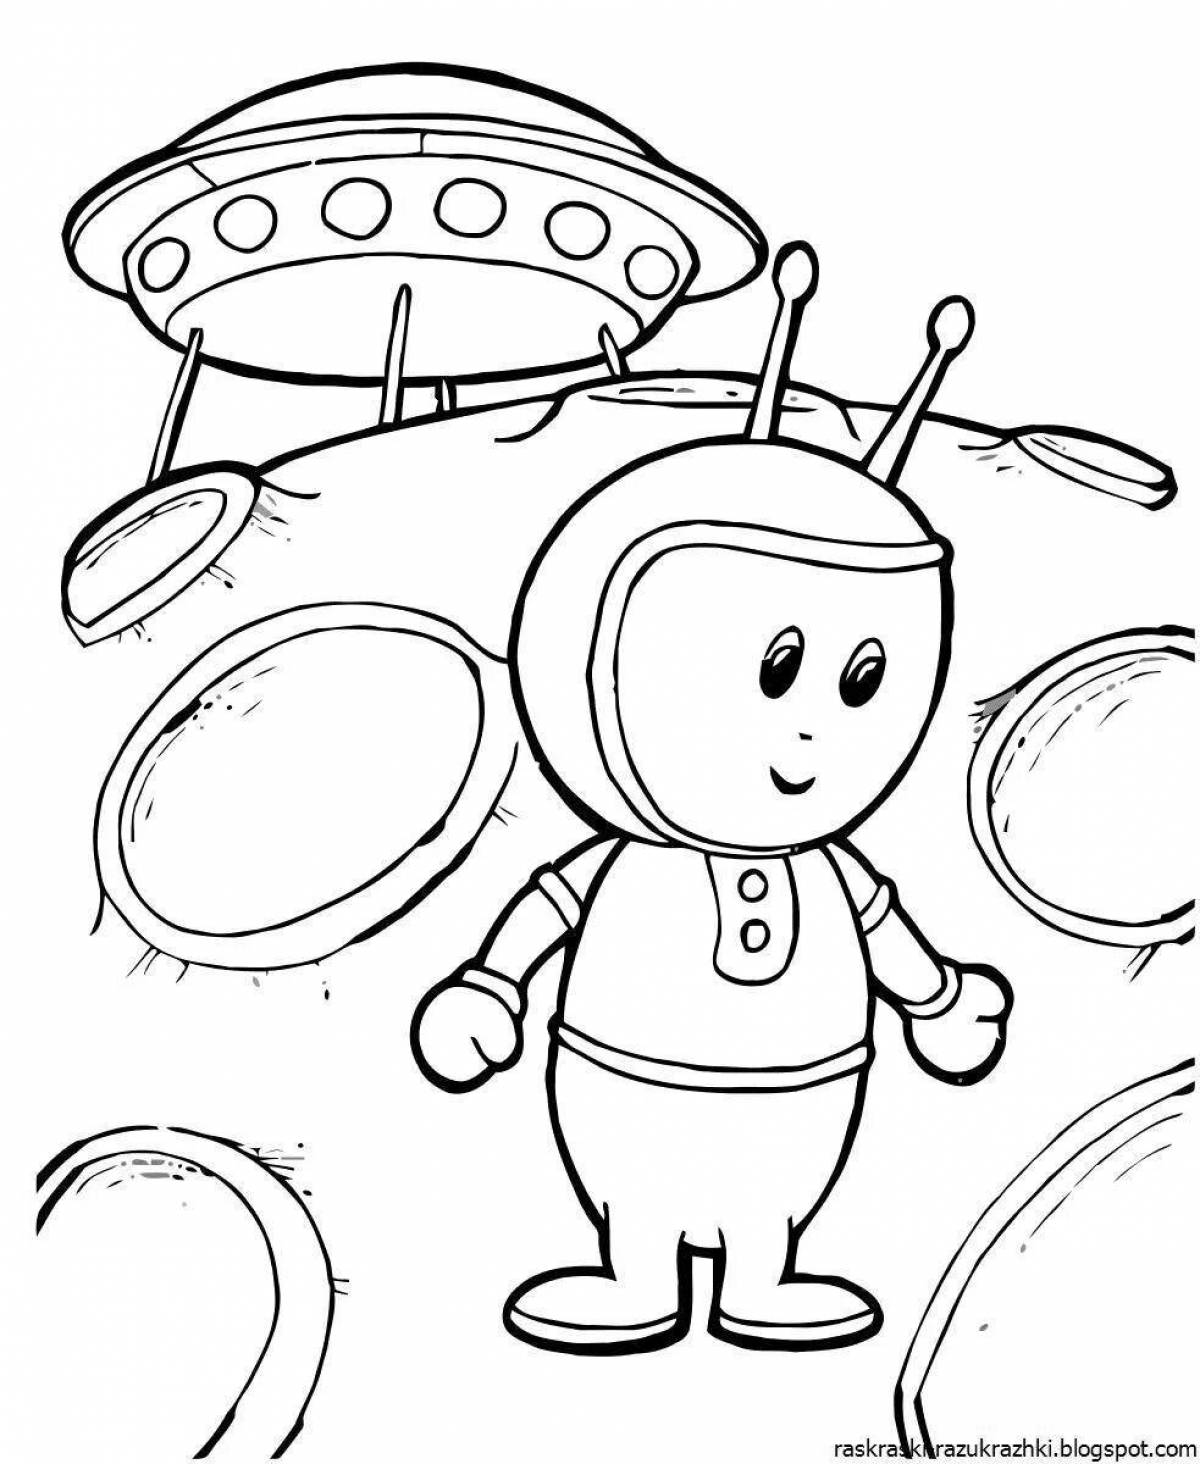 Color-frenzy space coloring page для детей 3-4 лет